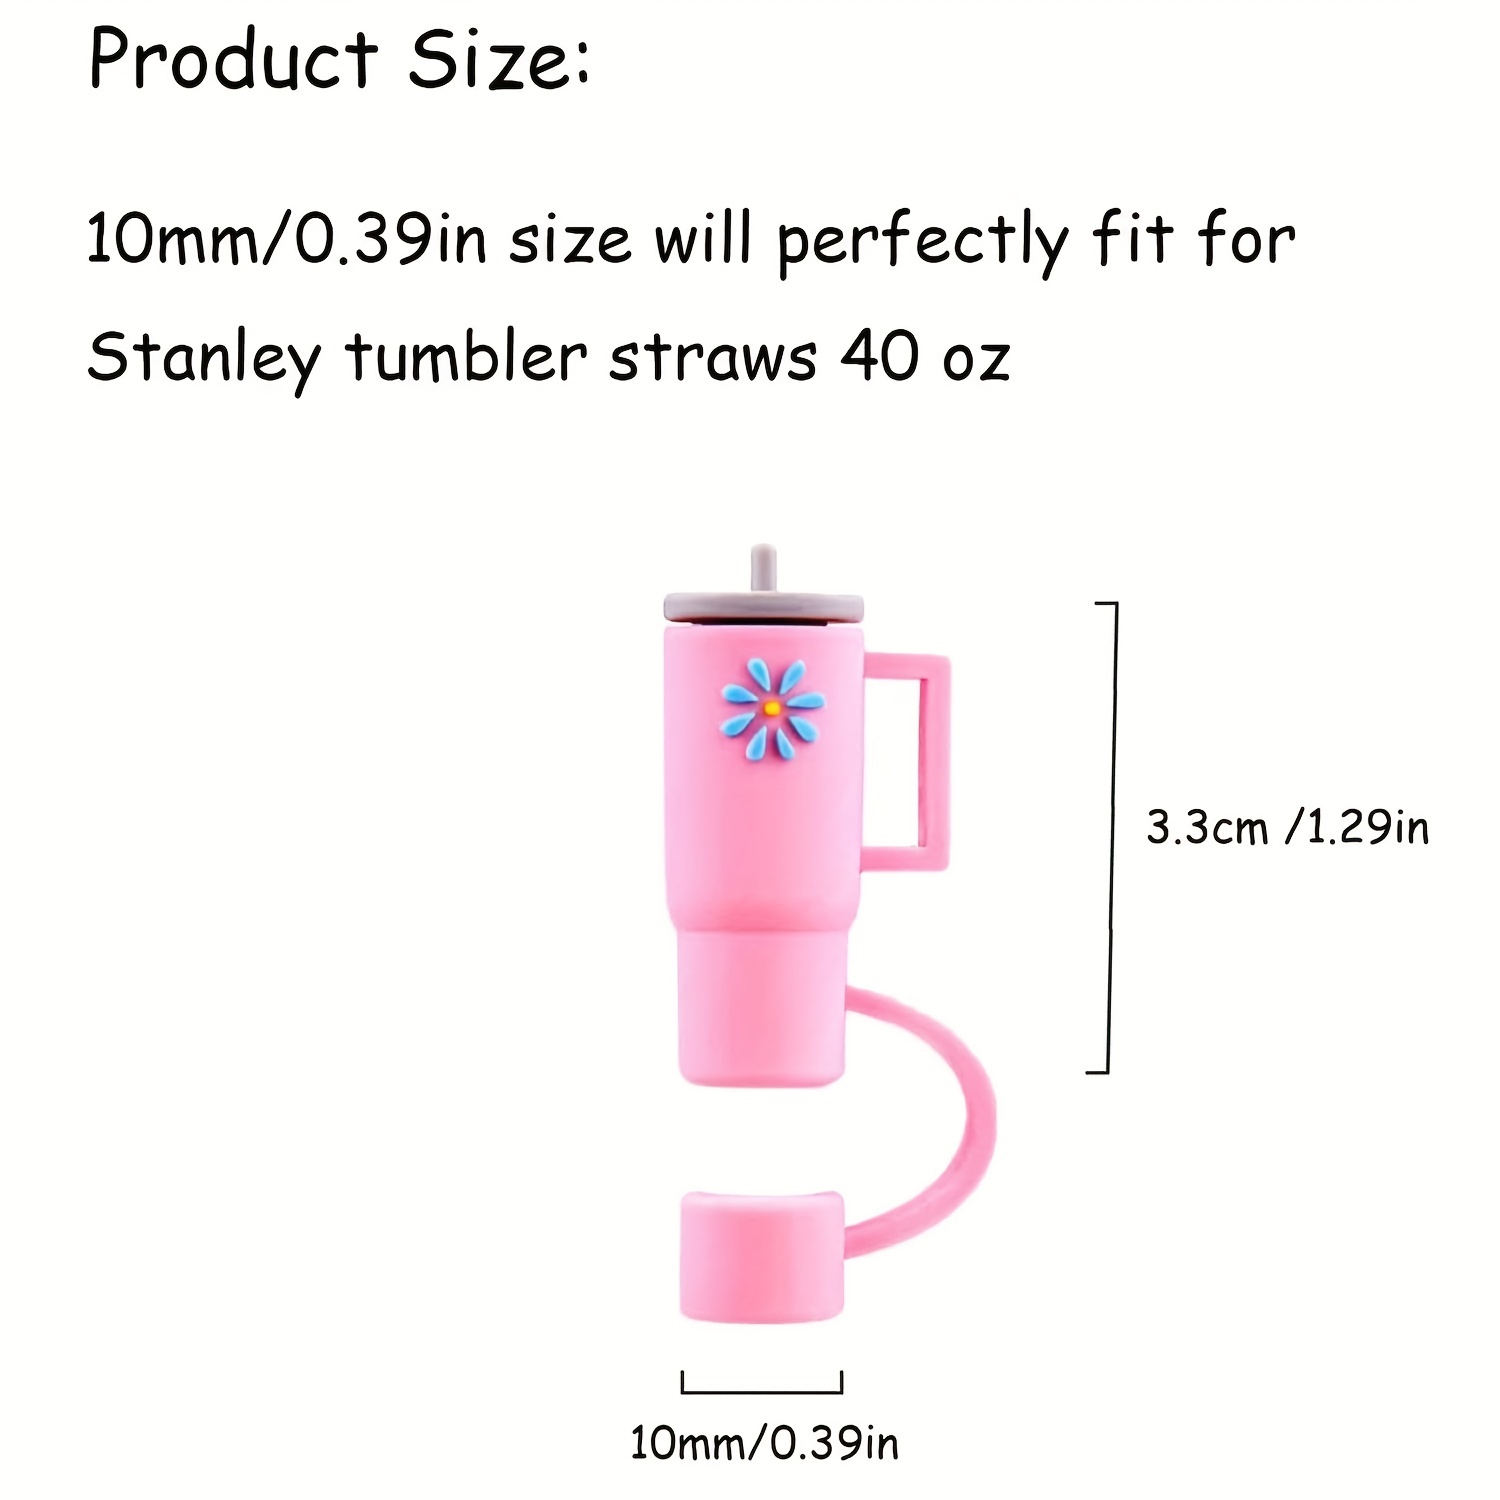 2pcs/4pcs Cute Silicone Straw Stopper for Stanley Tumbler - Fits 30oz/40oz  - Prevents Spills and Keeps Drinks Fresh - Mini Tip Cover Included